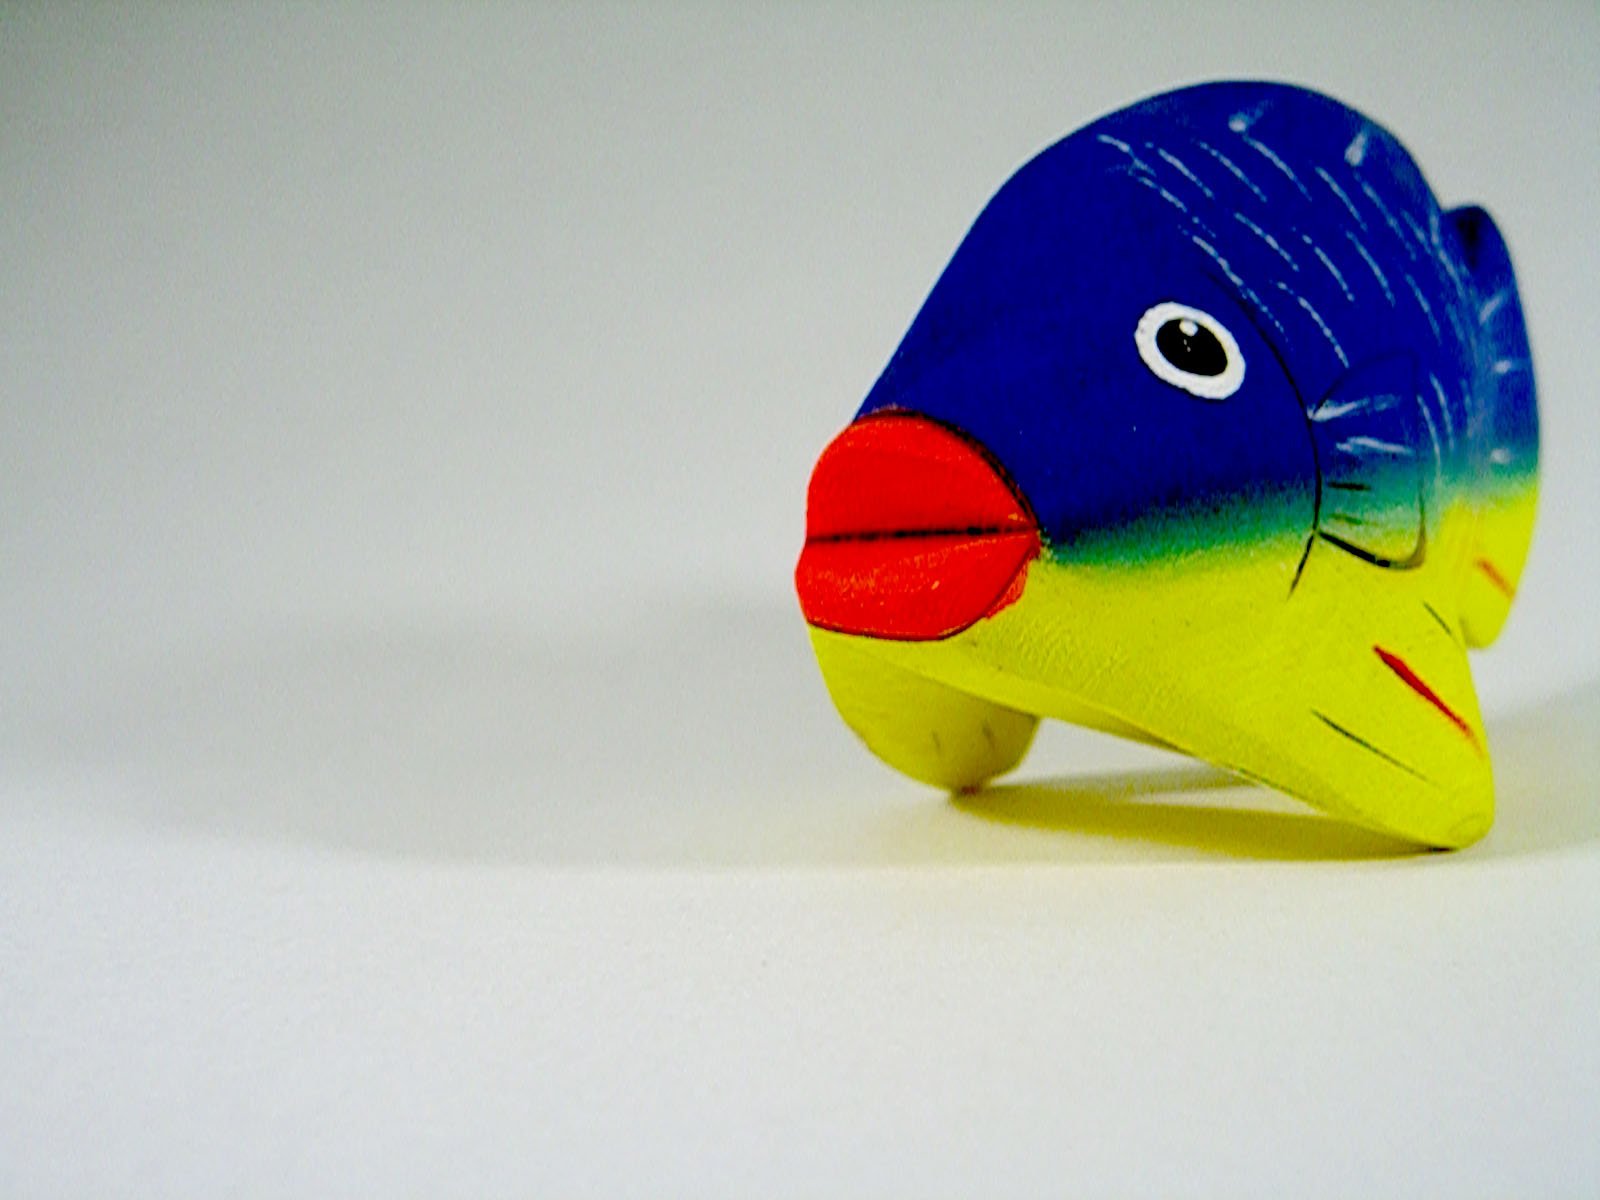 this is a blue, yellow, and orange fish toy